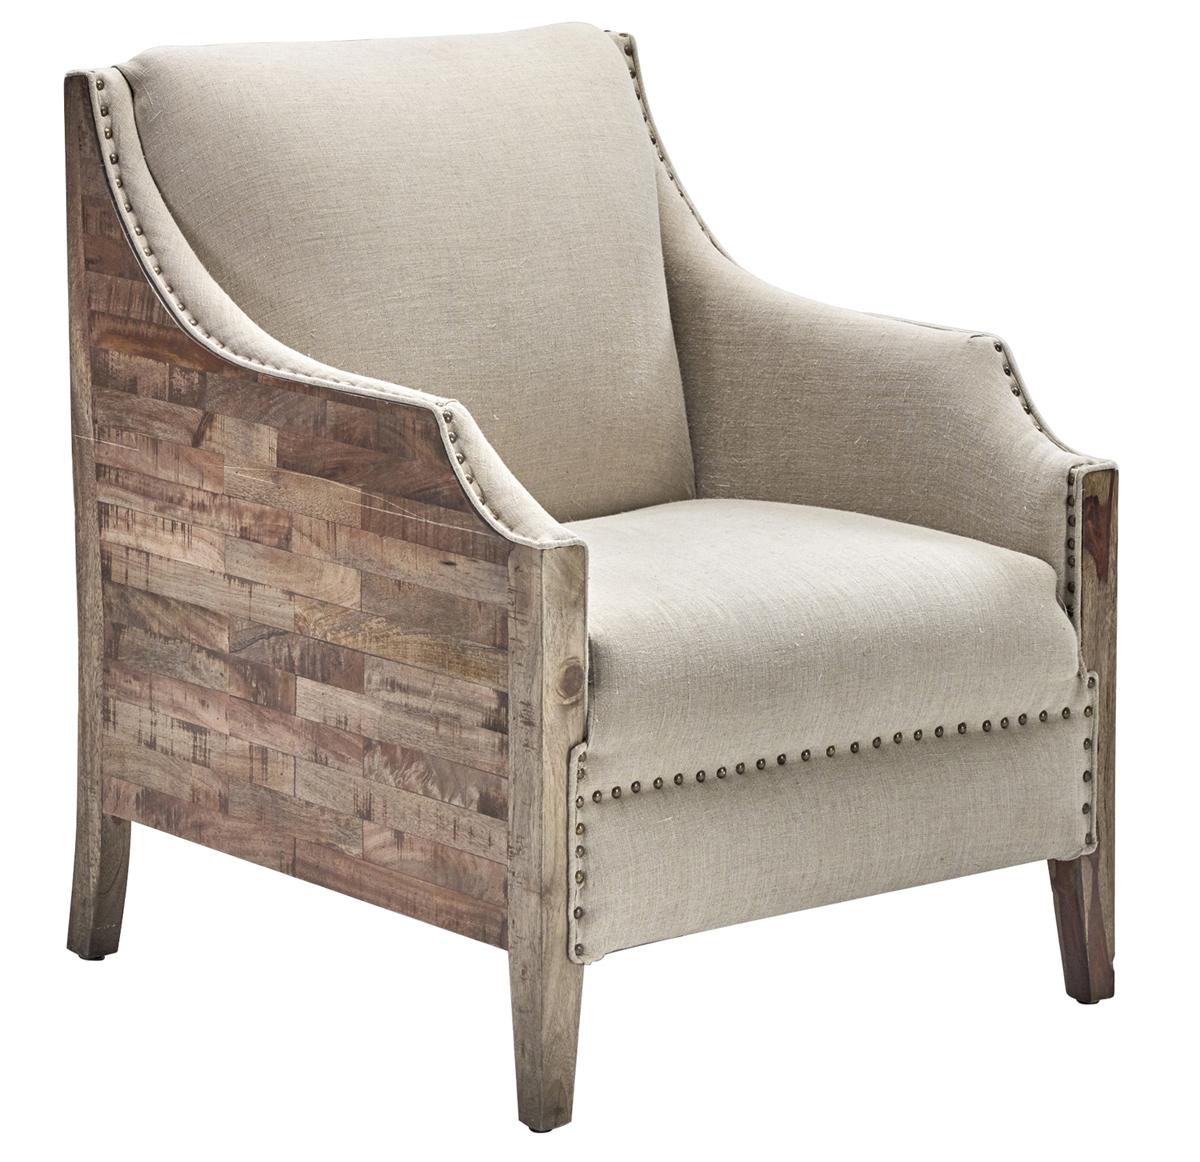 Transitional Chair CAC-4148 Latimer CAC-4148 in Beige Linen